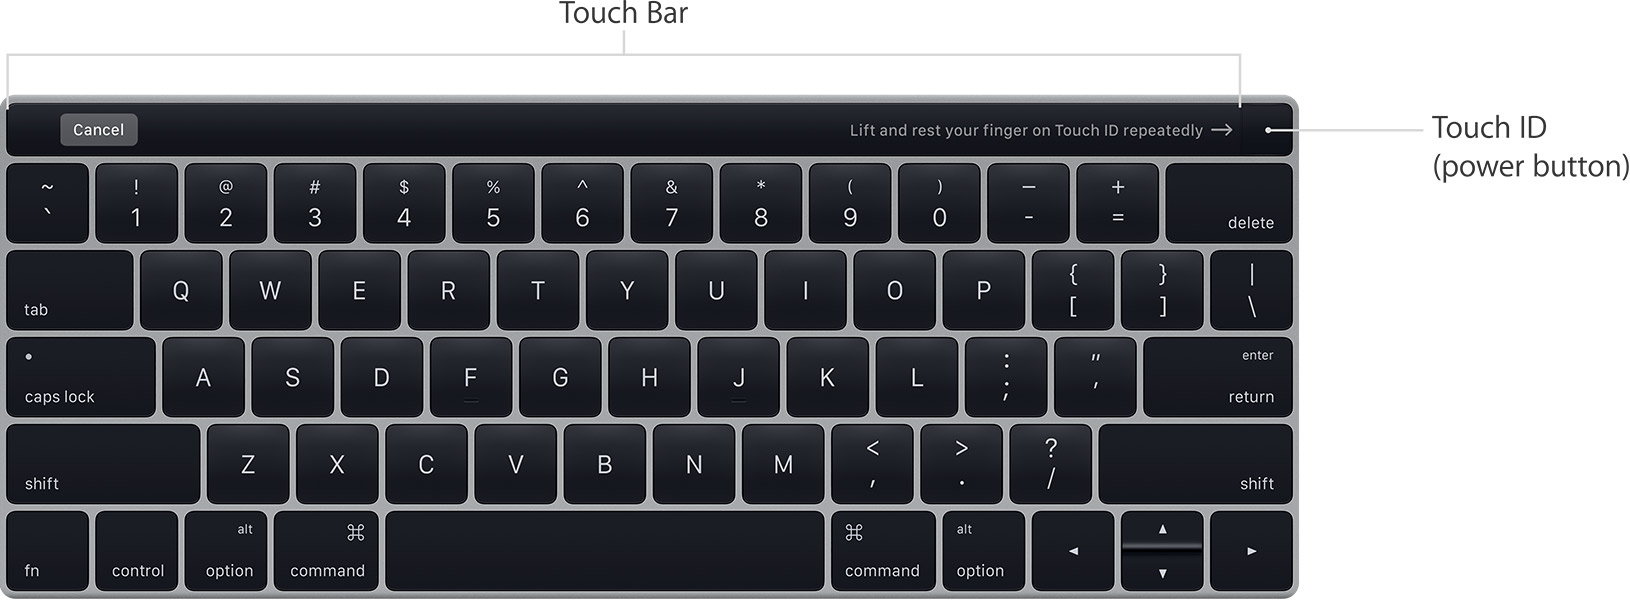 MacBook Pro Touch ID Touch Bar keyboard